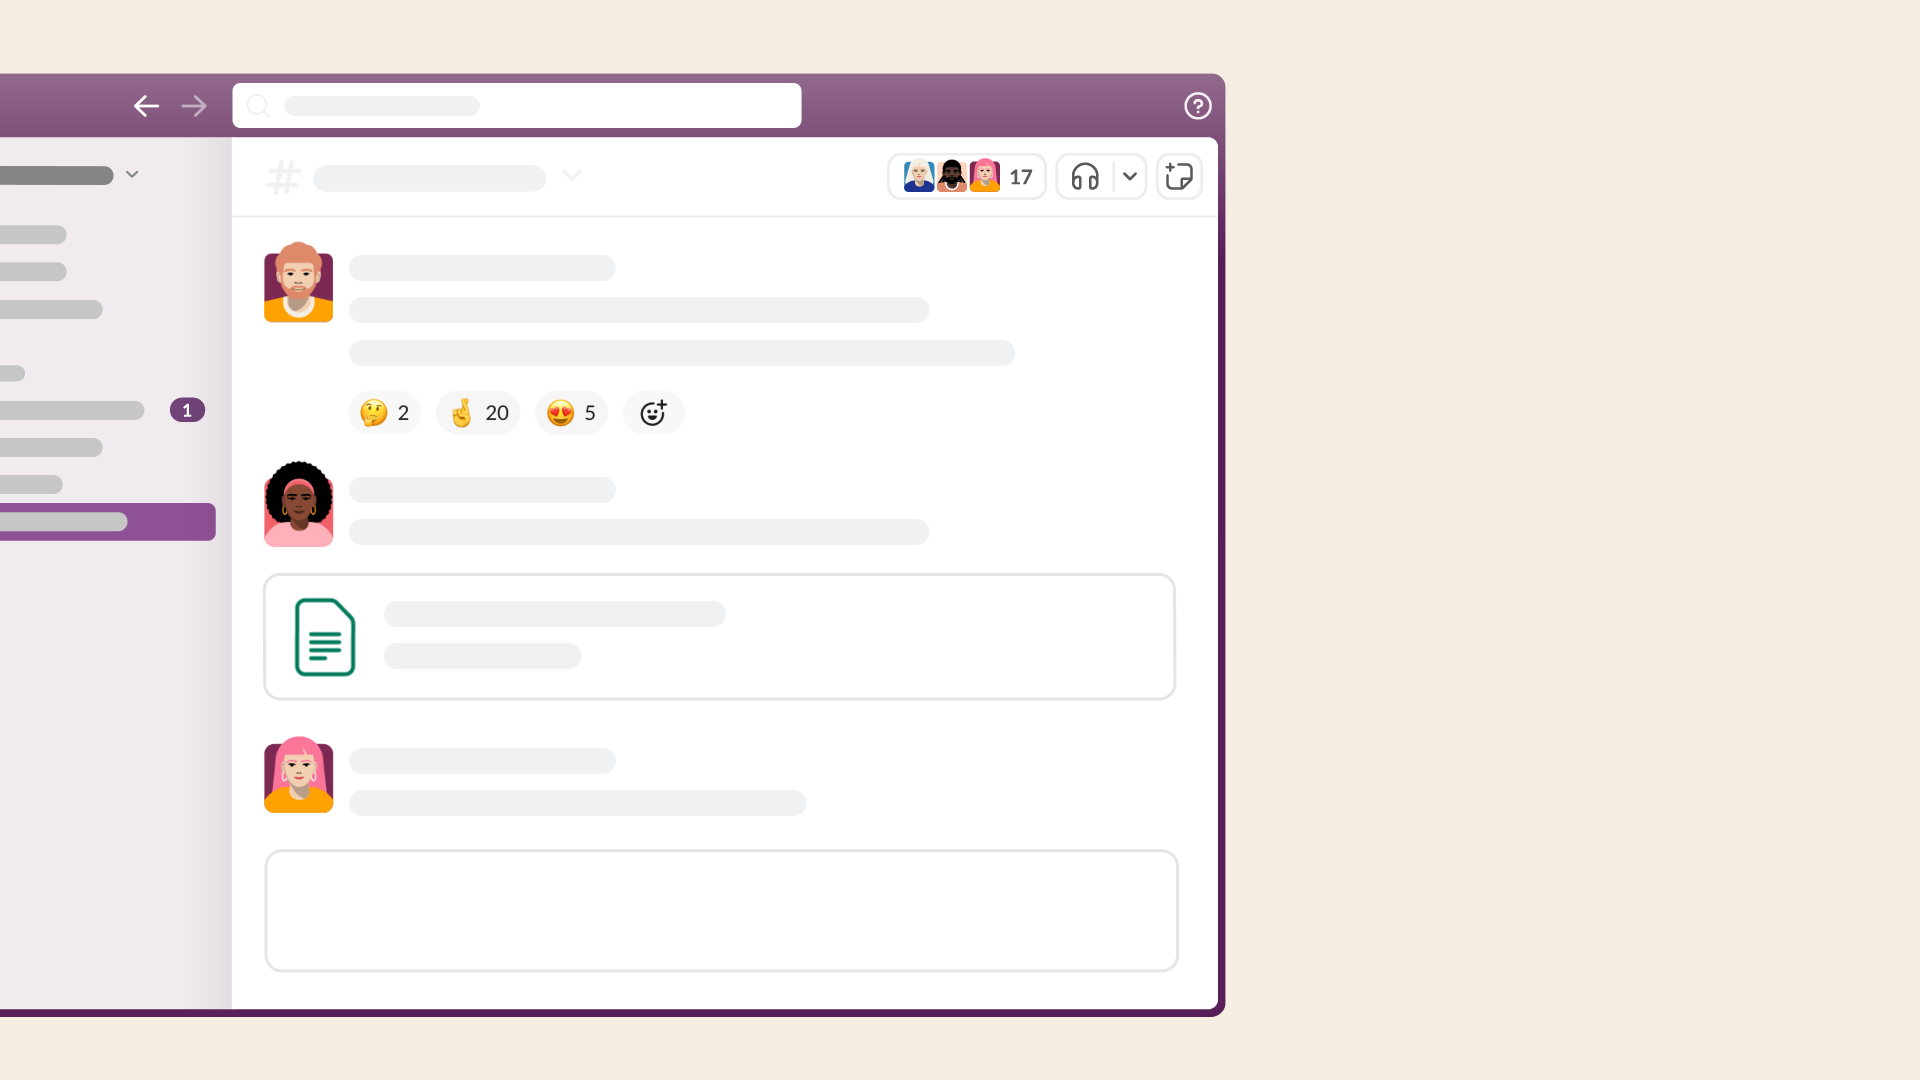 View of an example channel in Slack